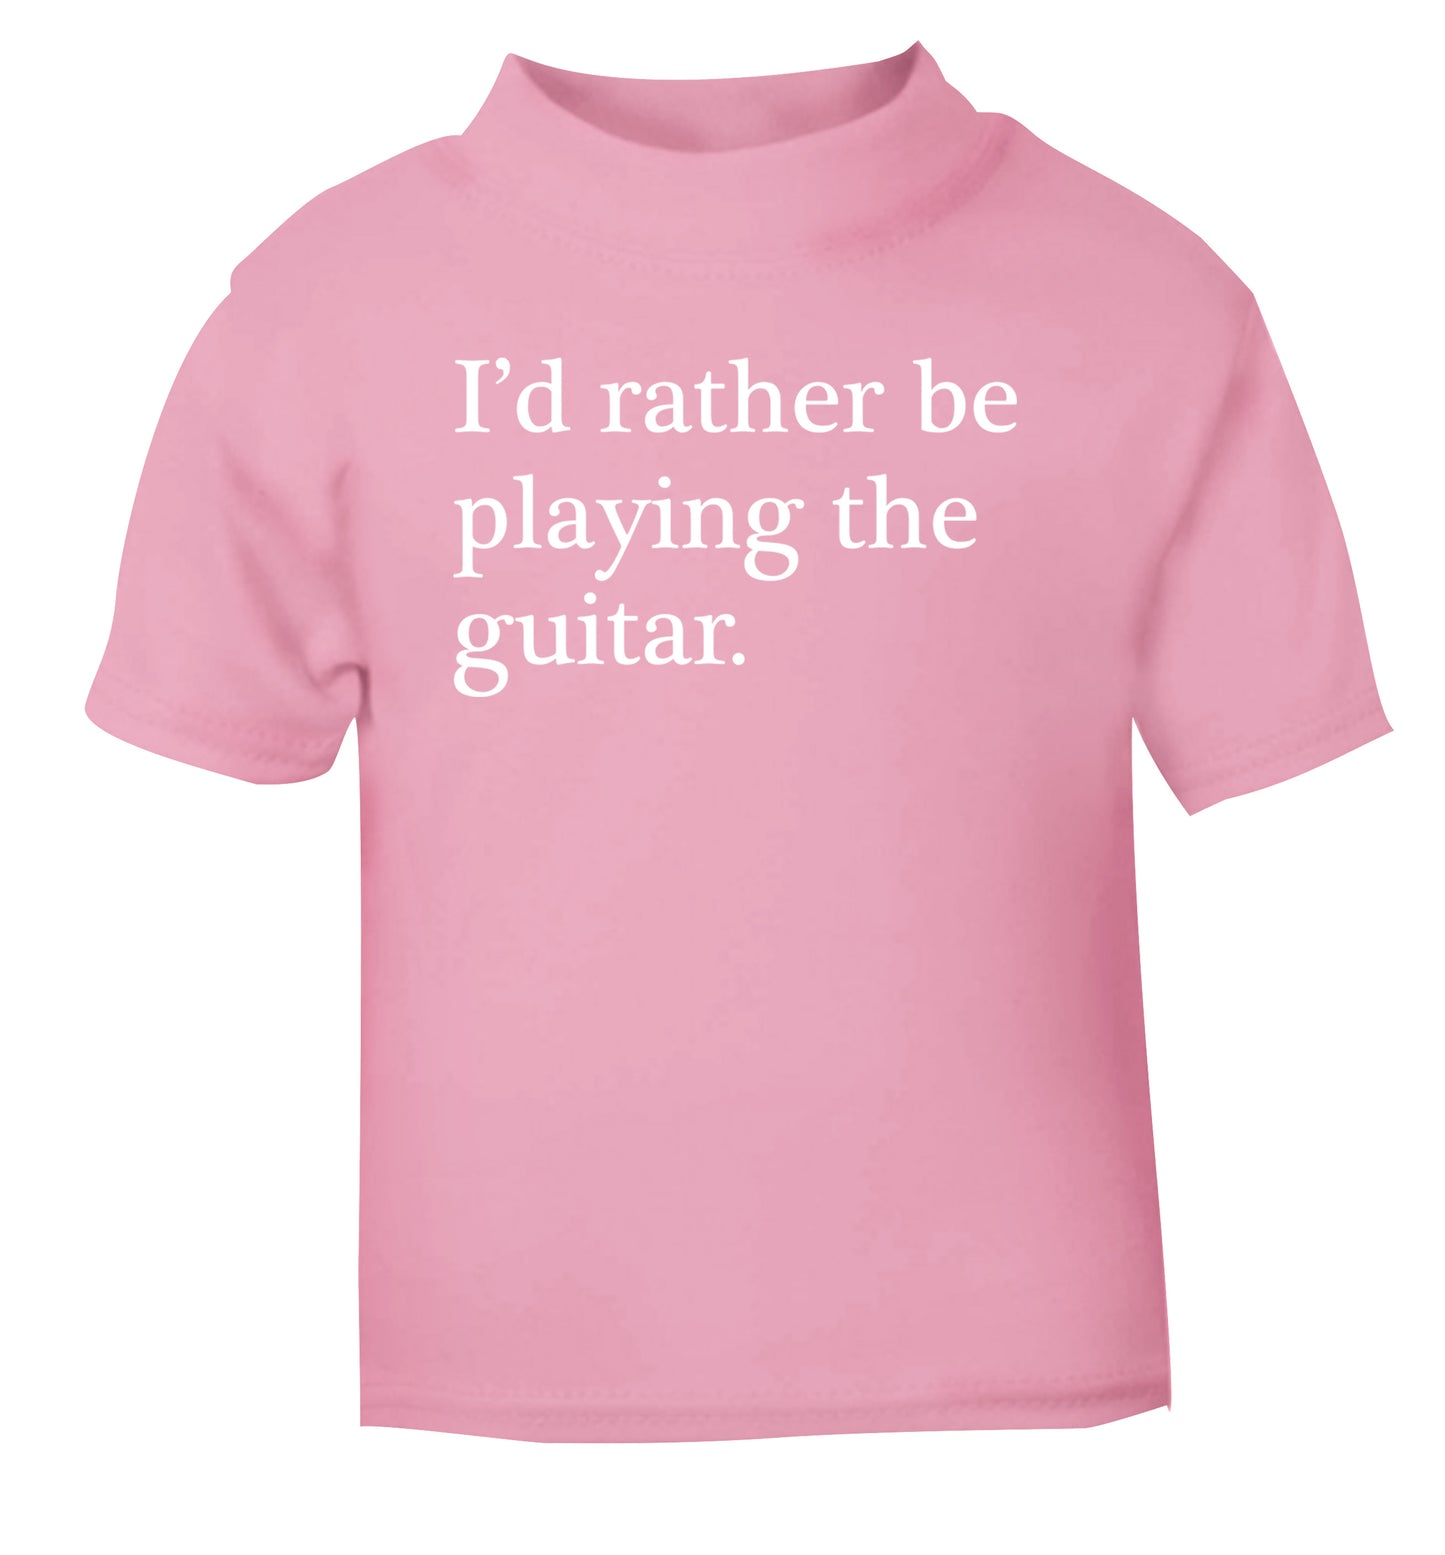 I'd rather be playing the guitar light pink Baby Toddler Tshirt 2 Years